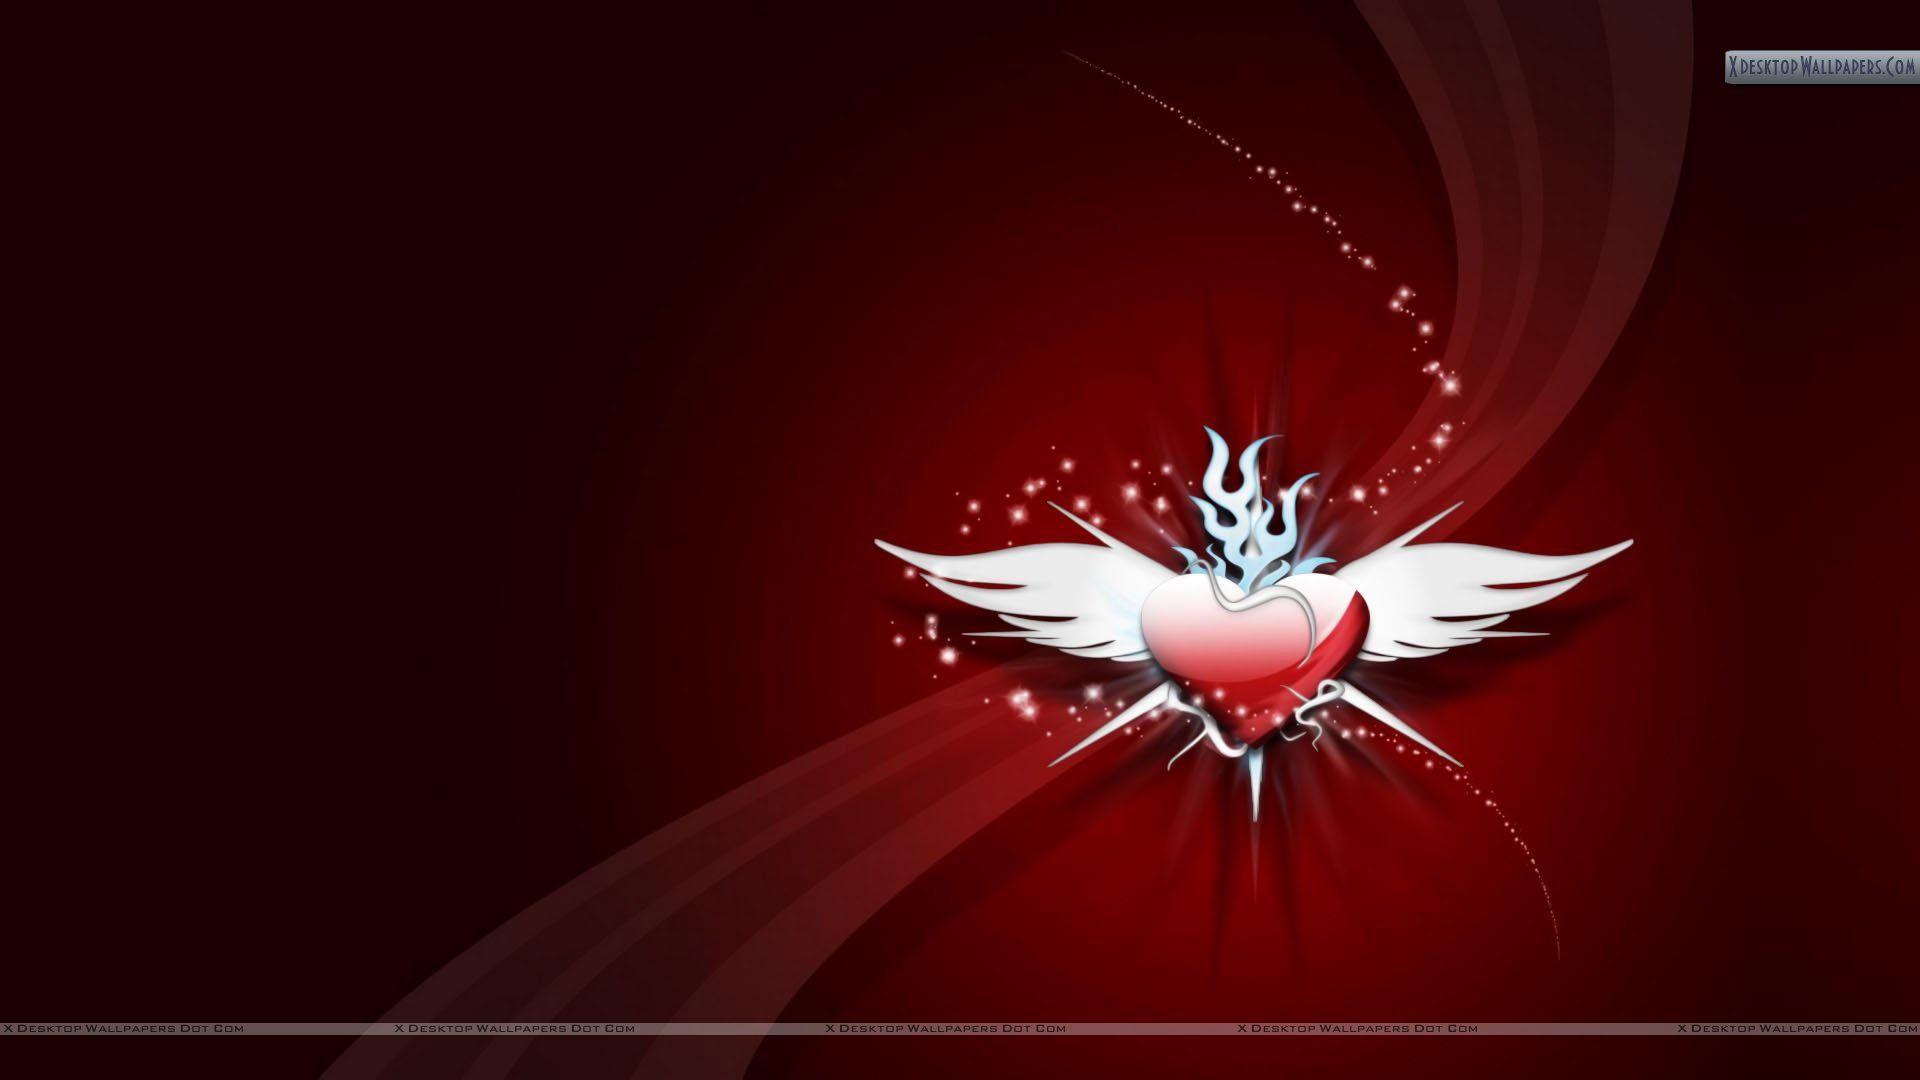 Wallpaper For > Cool Heart Background Picture